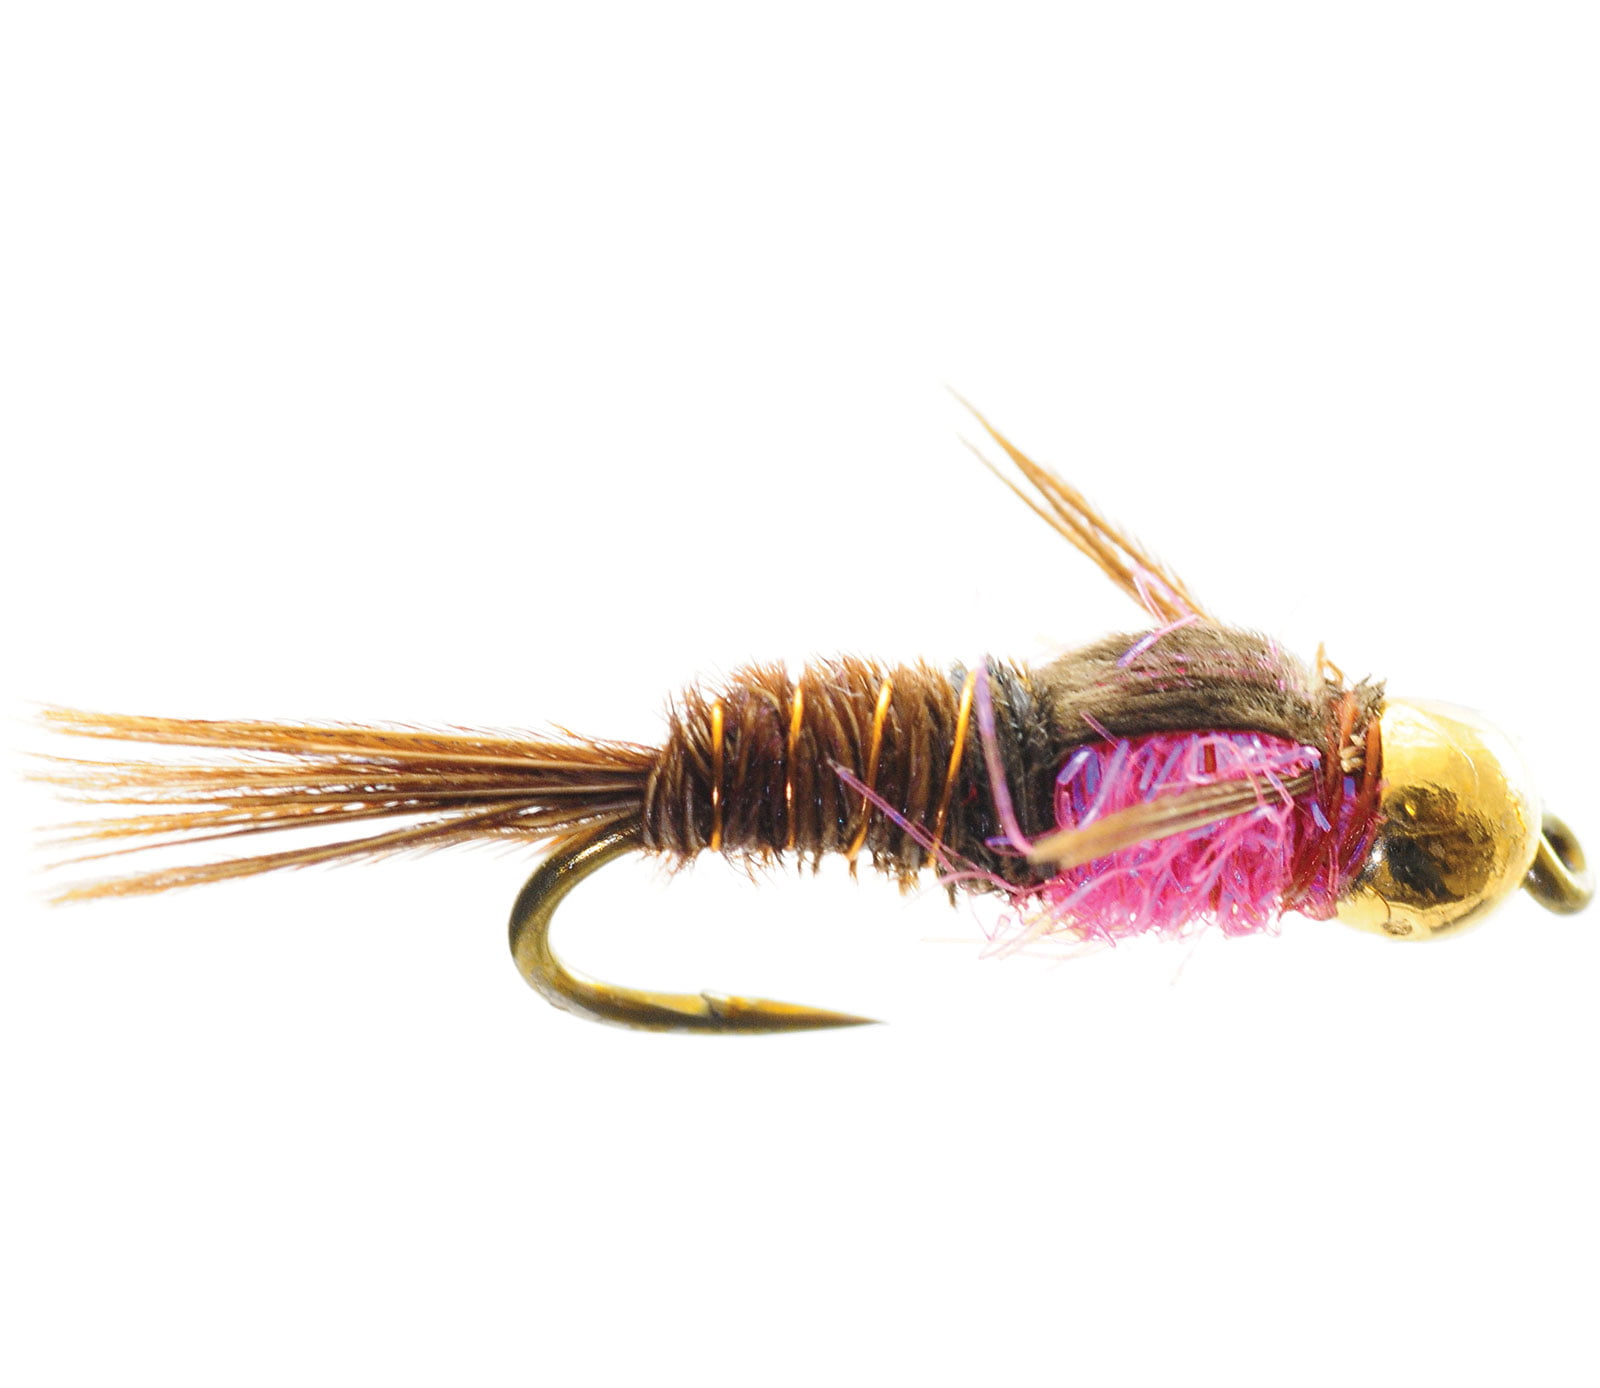 Available in size 8-16 BH. 4-pack Pheasant tail ICE FLIES 